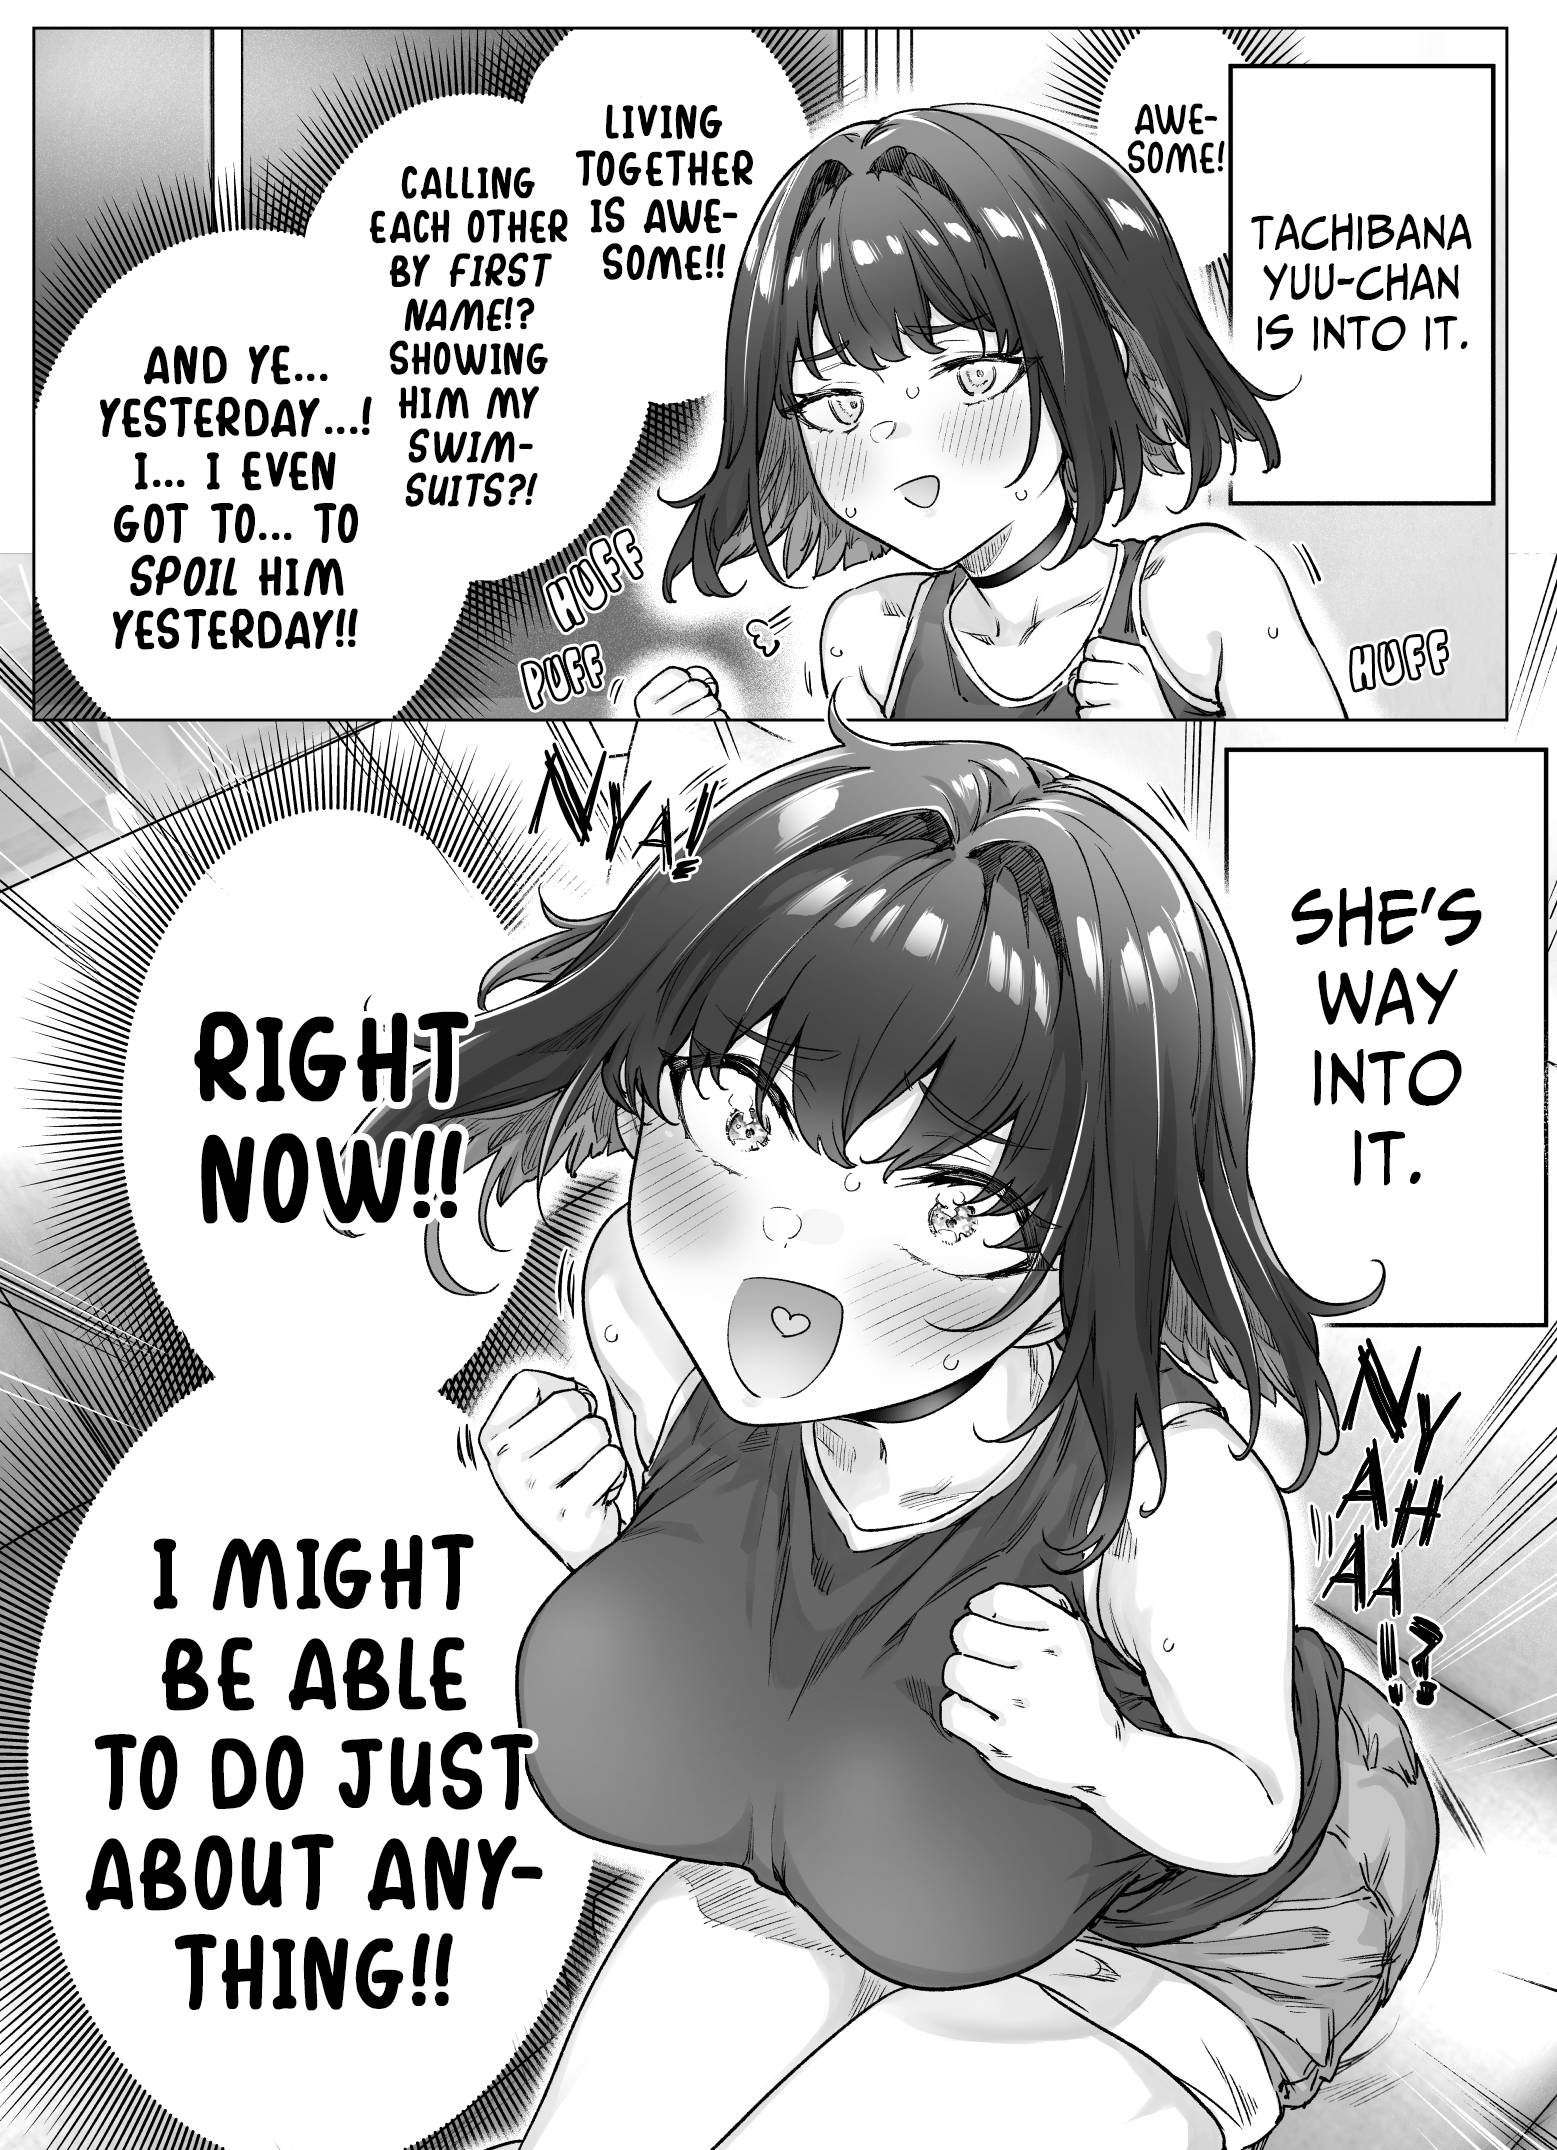 The Tsuntsuntsuntsuntsuntsuntsuntsuntsuntsuntsundere Girl Getting Less and Less Tsun Day by Day - chapter 78 - #1